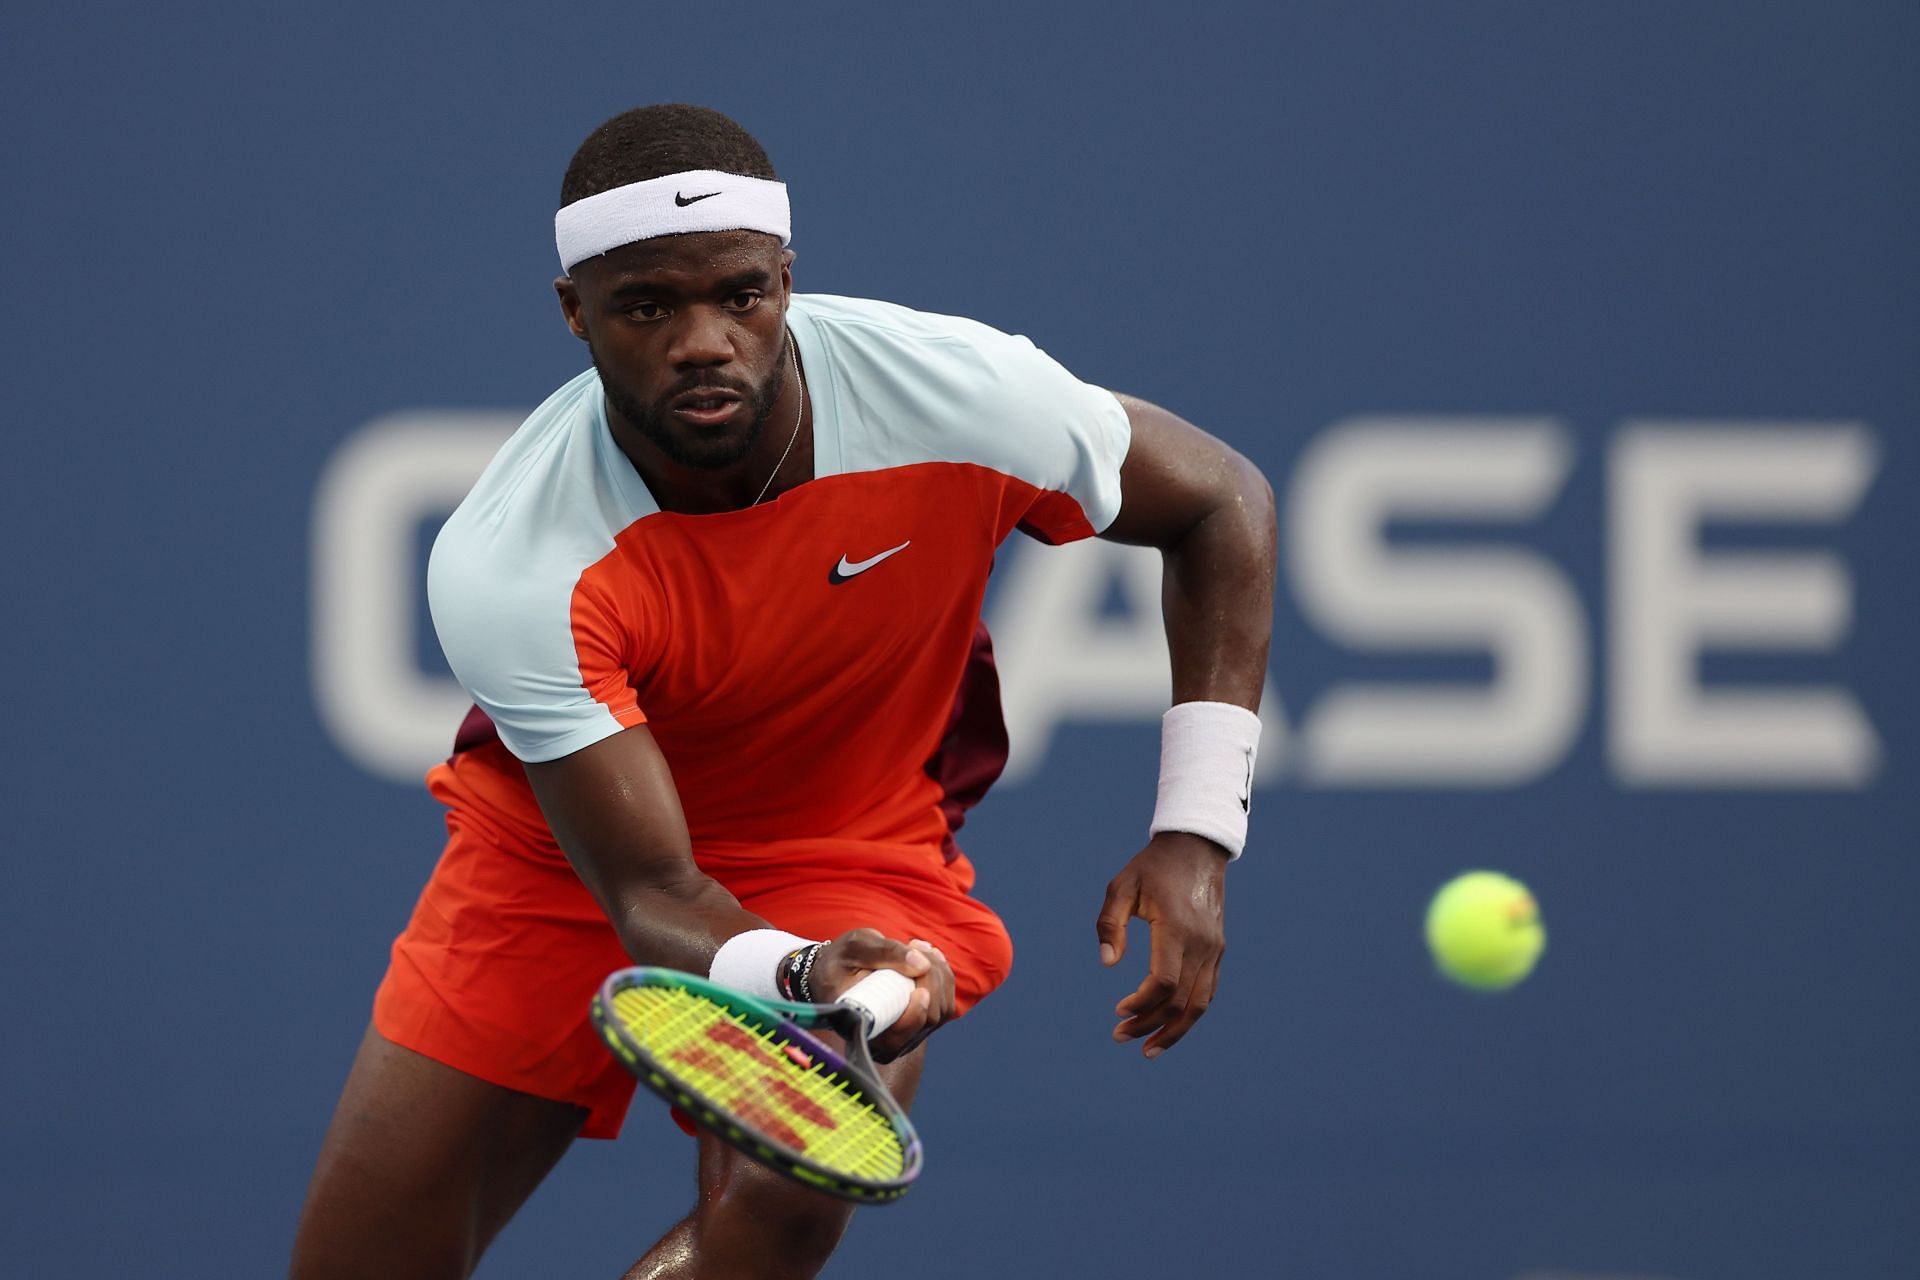 Tiafoe at the 2022 US Open